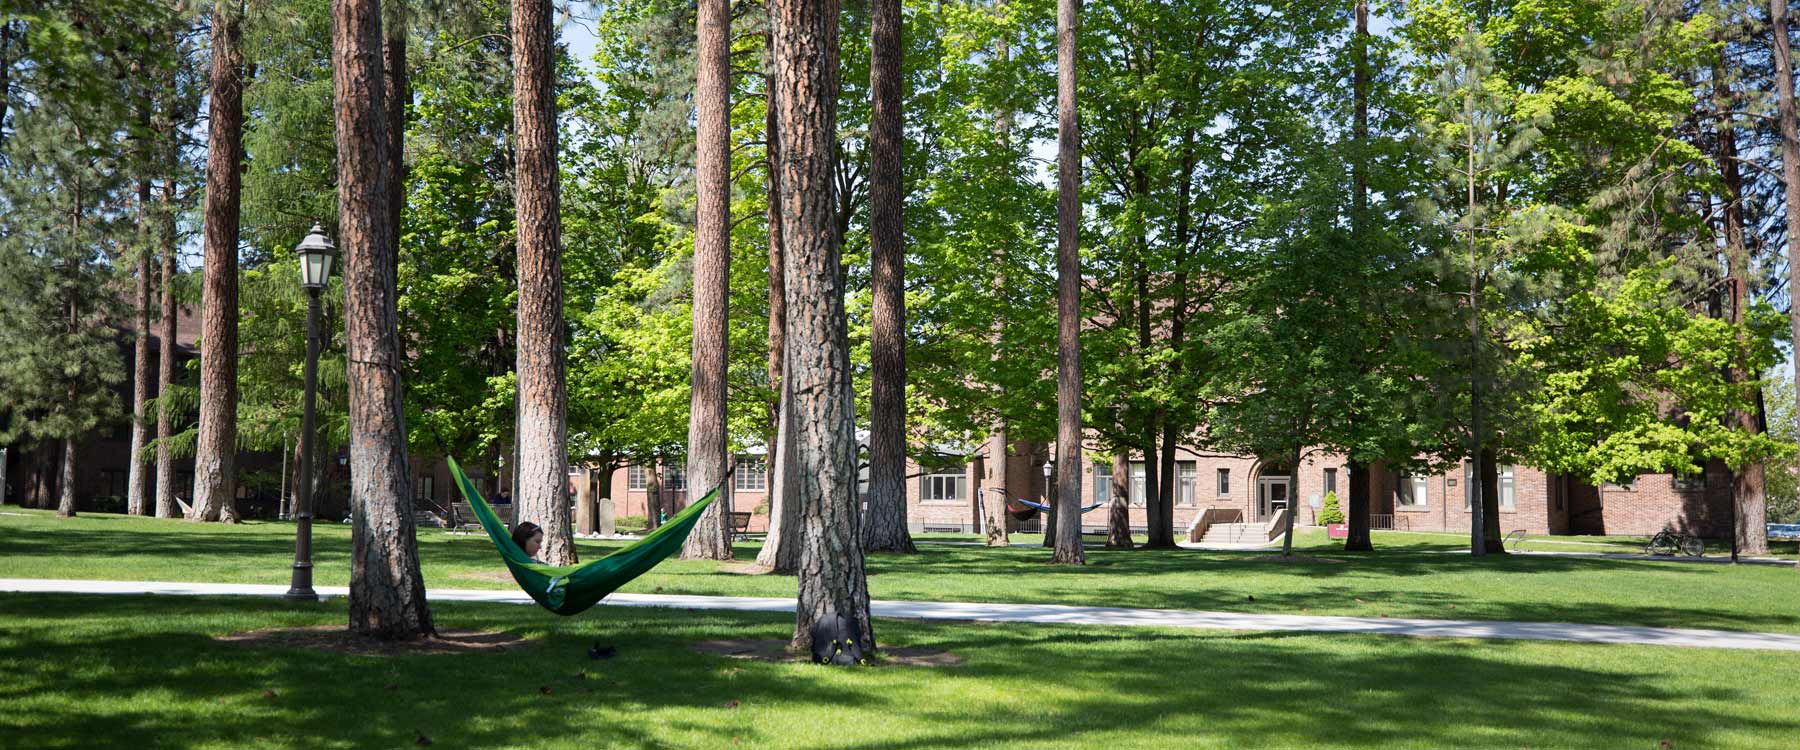 Tall pine trees shade the campus grounds. Between the trees, students sit in hammocks reading.